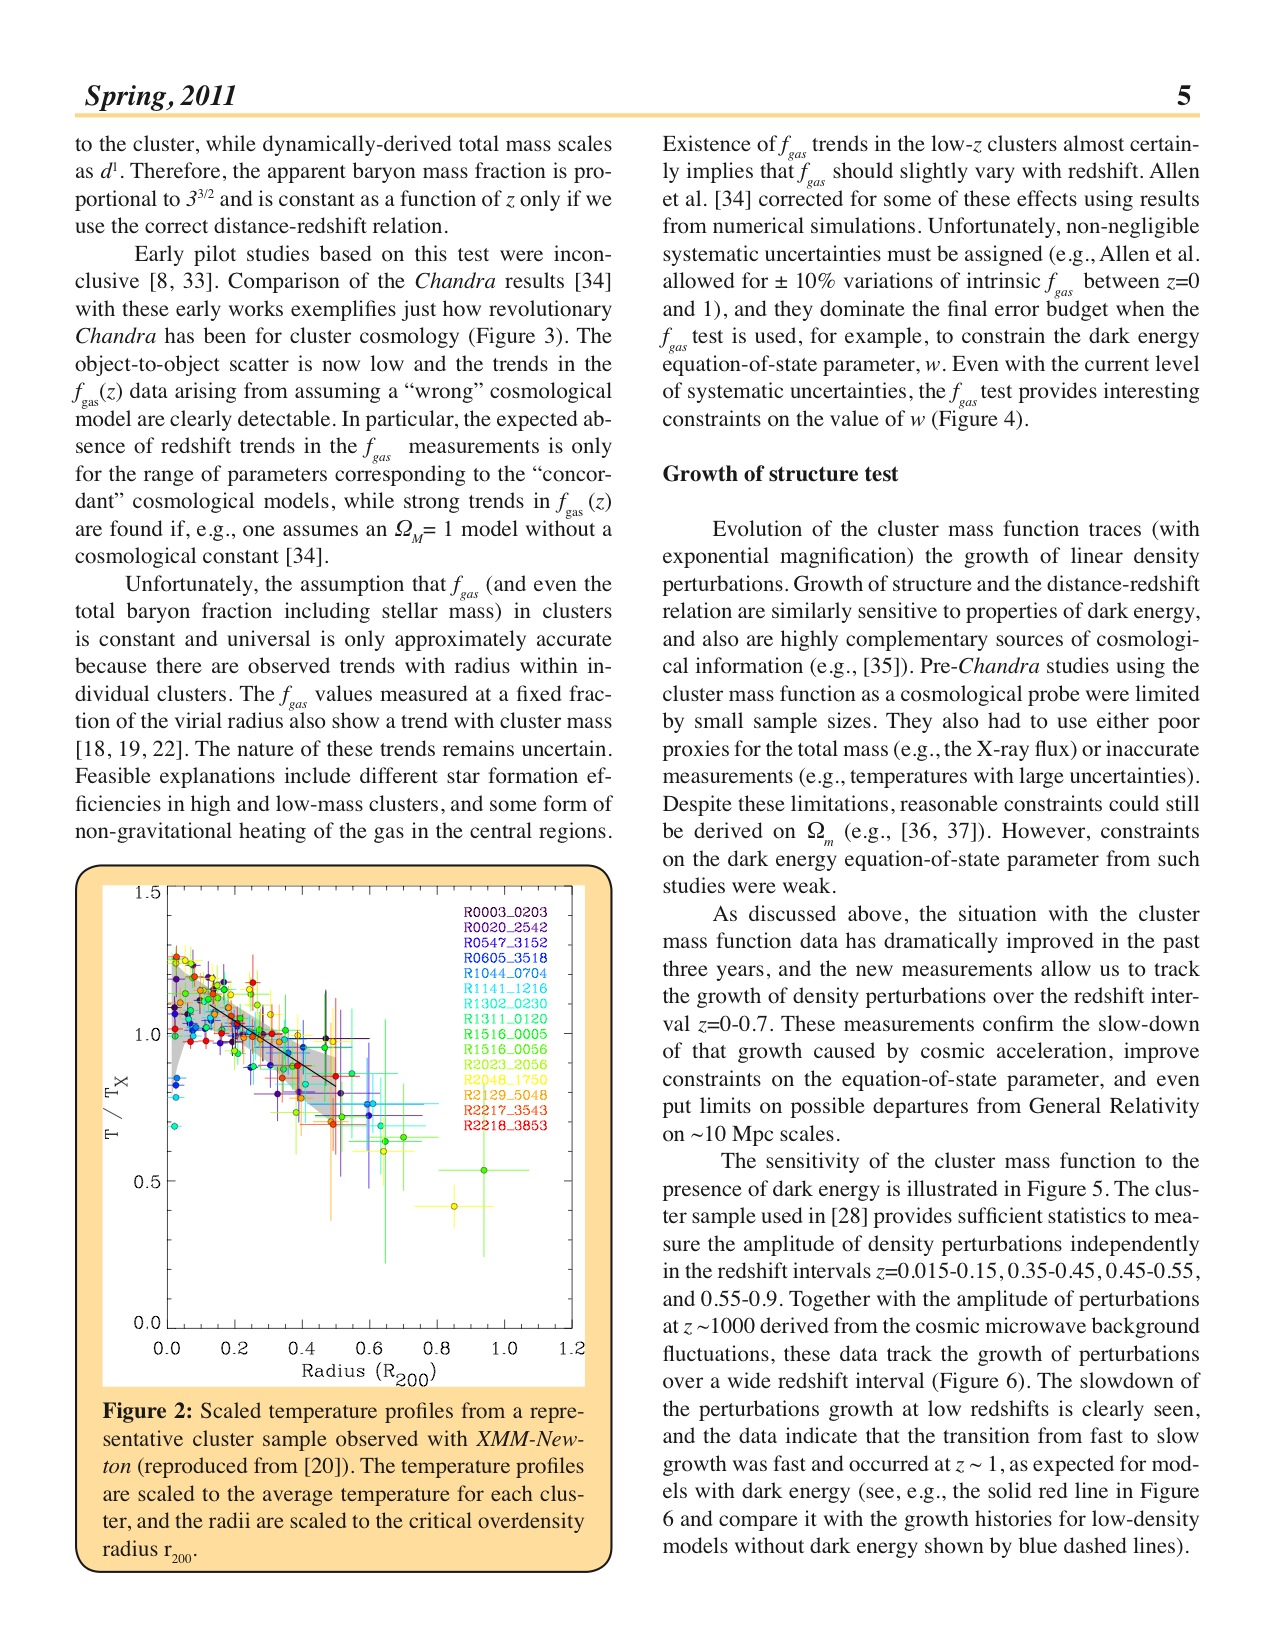 Page 5 of the Chandra Newsletter, issue 18.